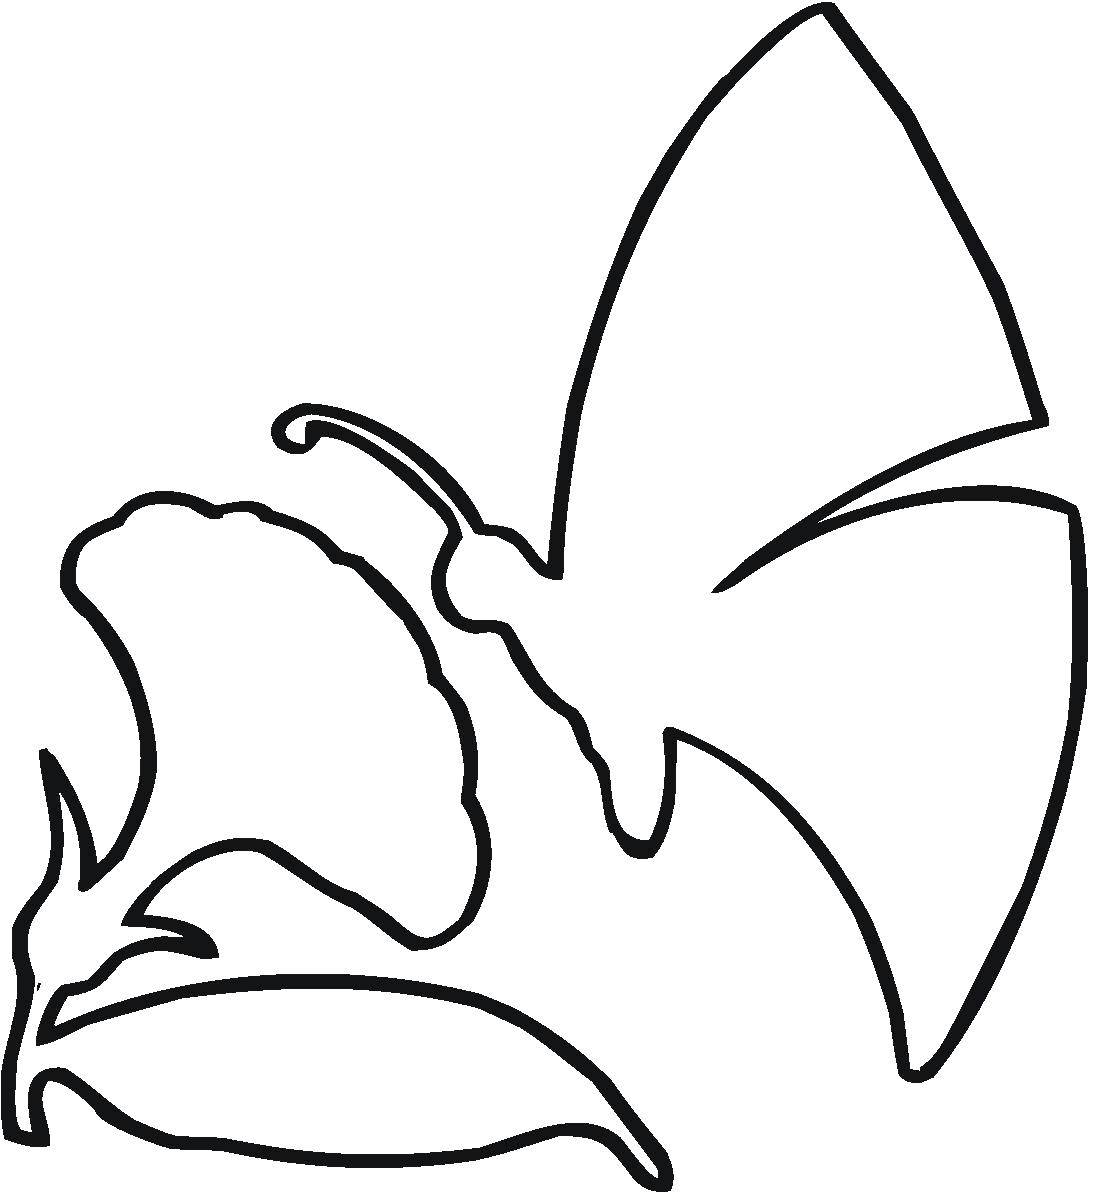 Coloring The outline of the butterfly and flower. Category The contours of the flower to cut. Tags:  outline , butterfly, flower.